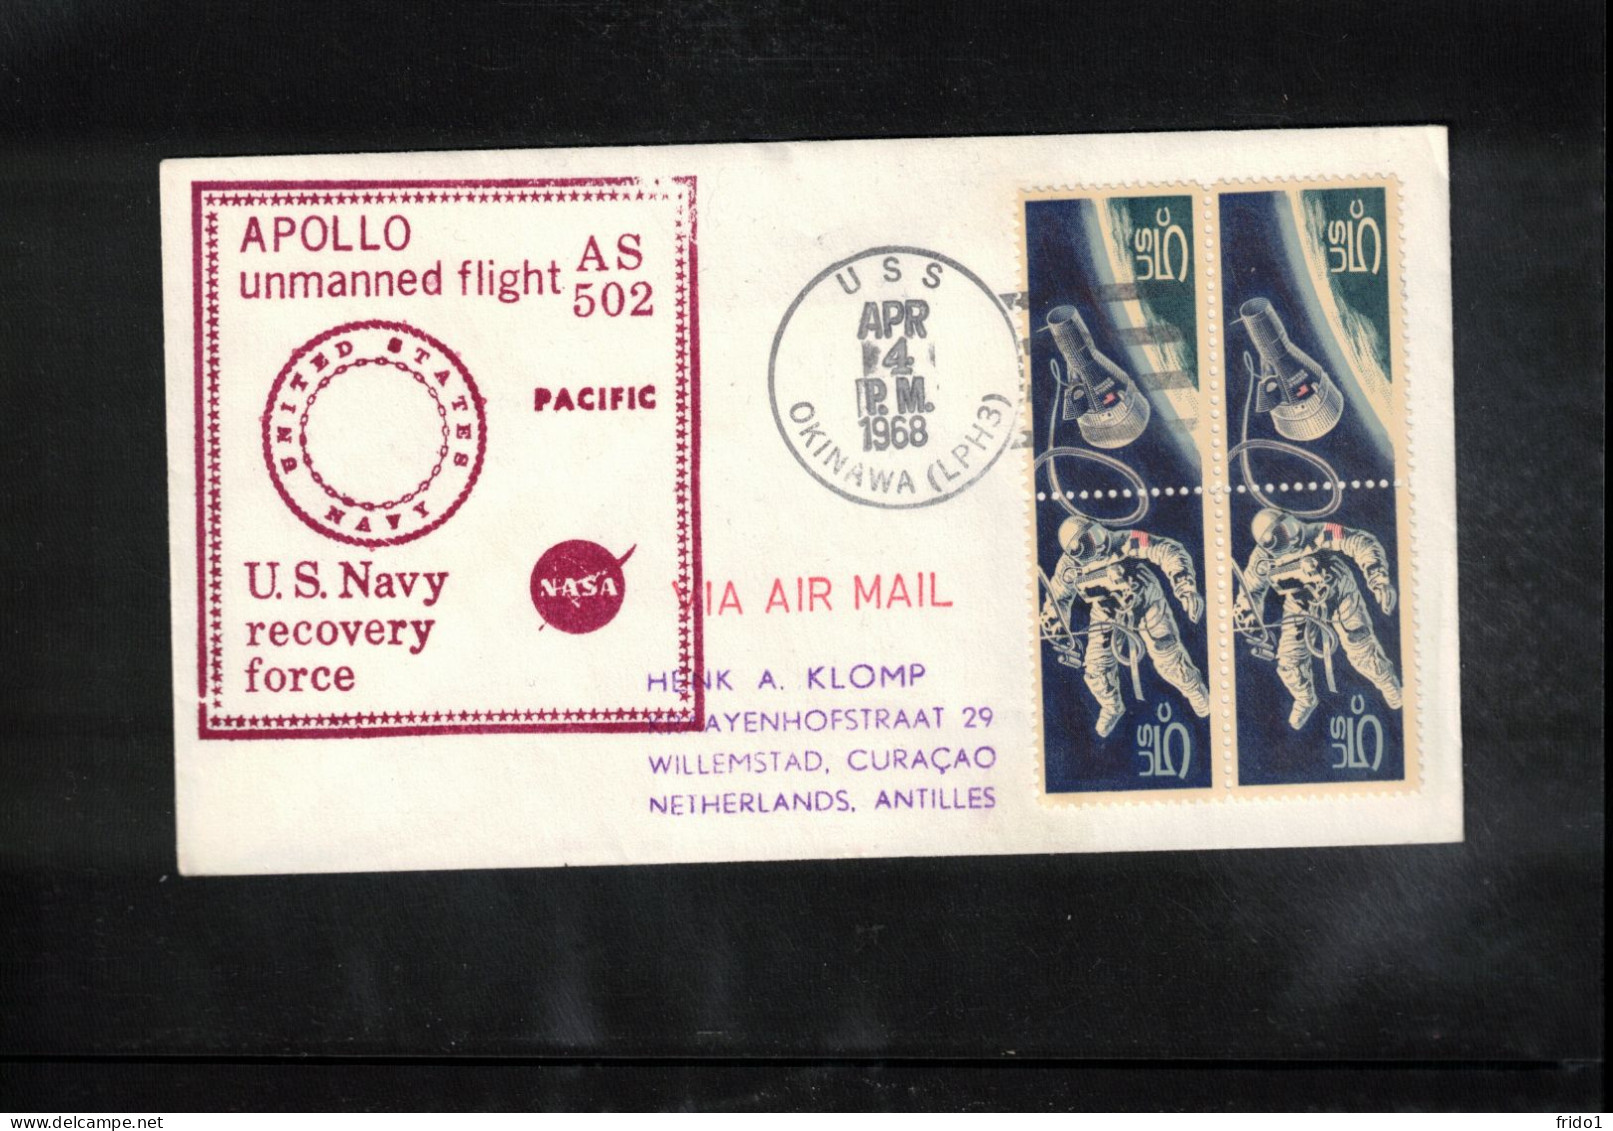 USA 1968 Space / Weltraum Apollo Unmanned Flight AS 502 - US Navy Recovery Force Ship USS Okinawa Interesting Cover - Stati Uniti